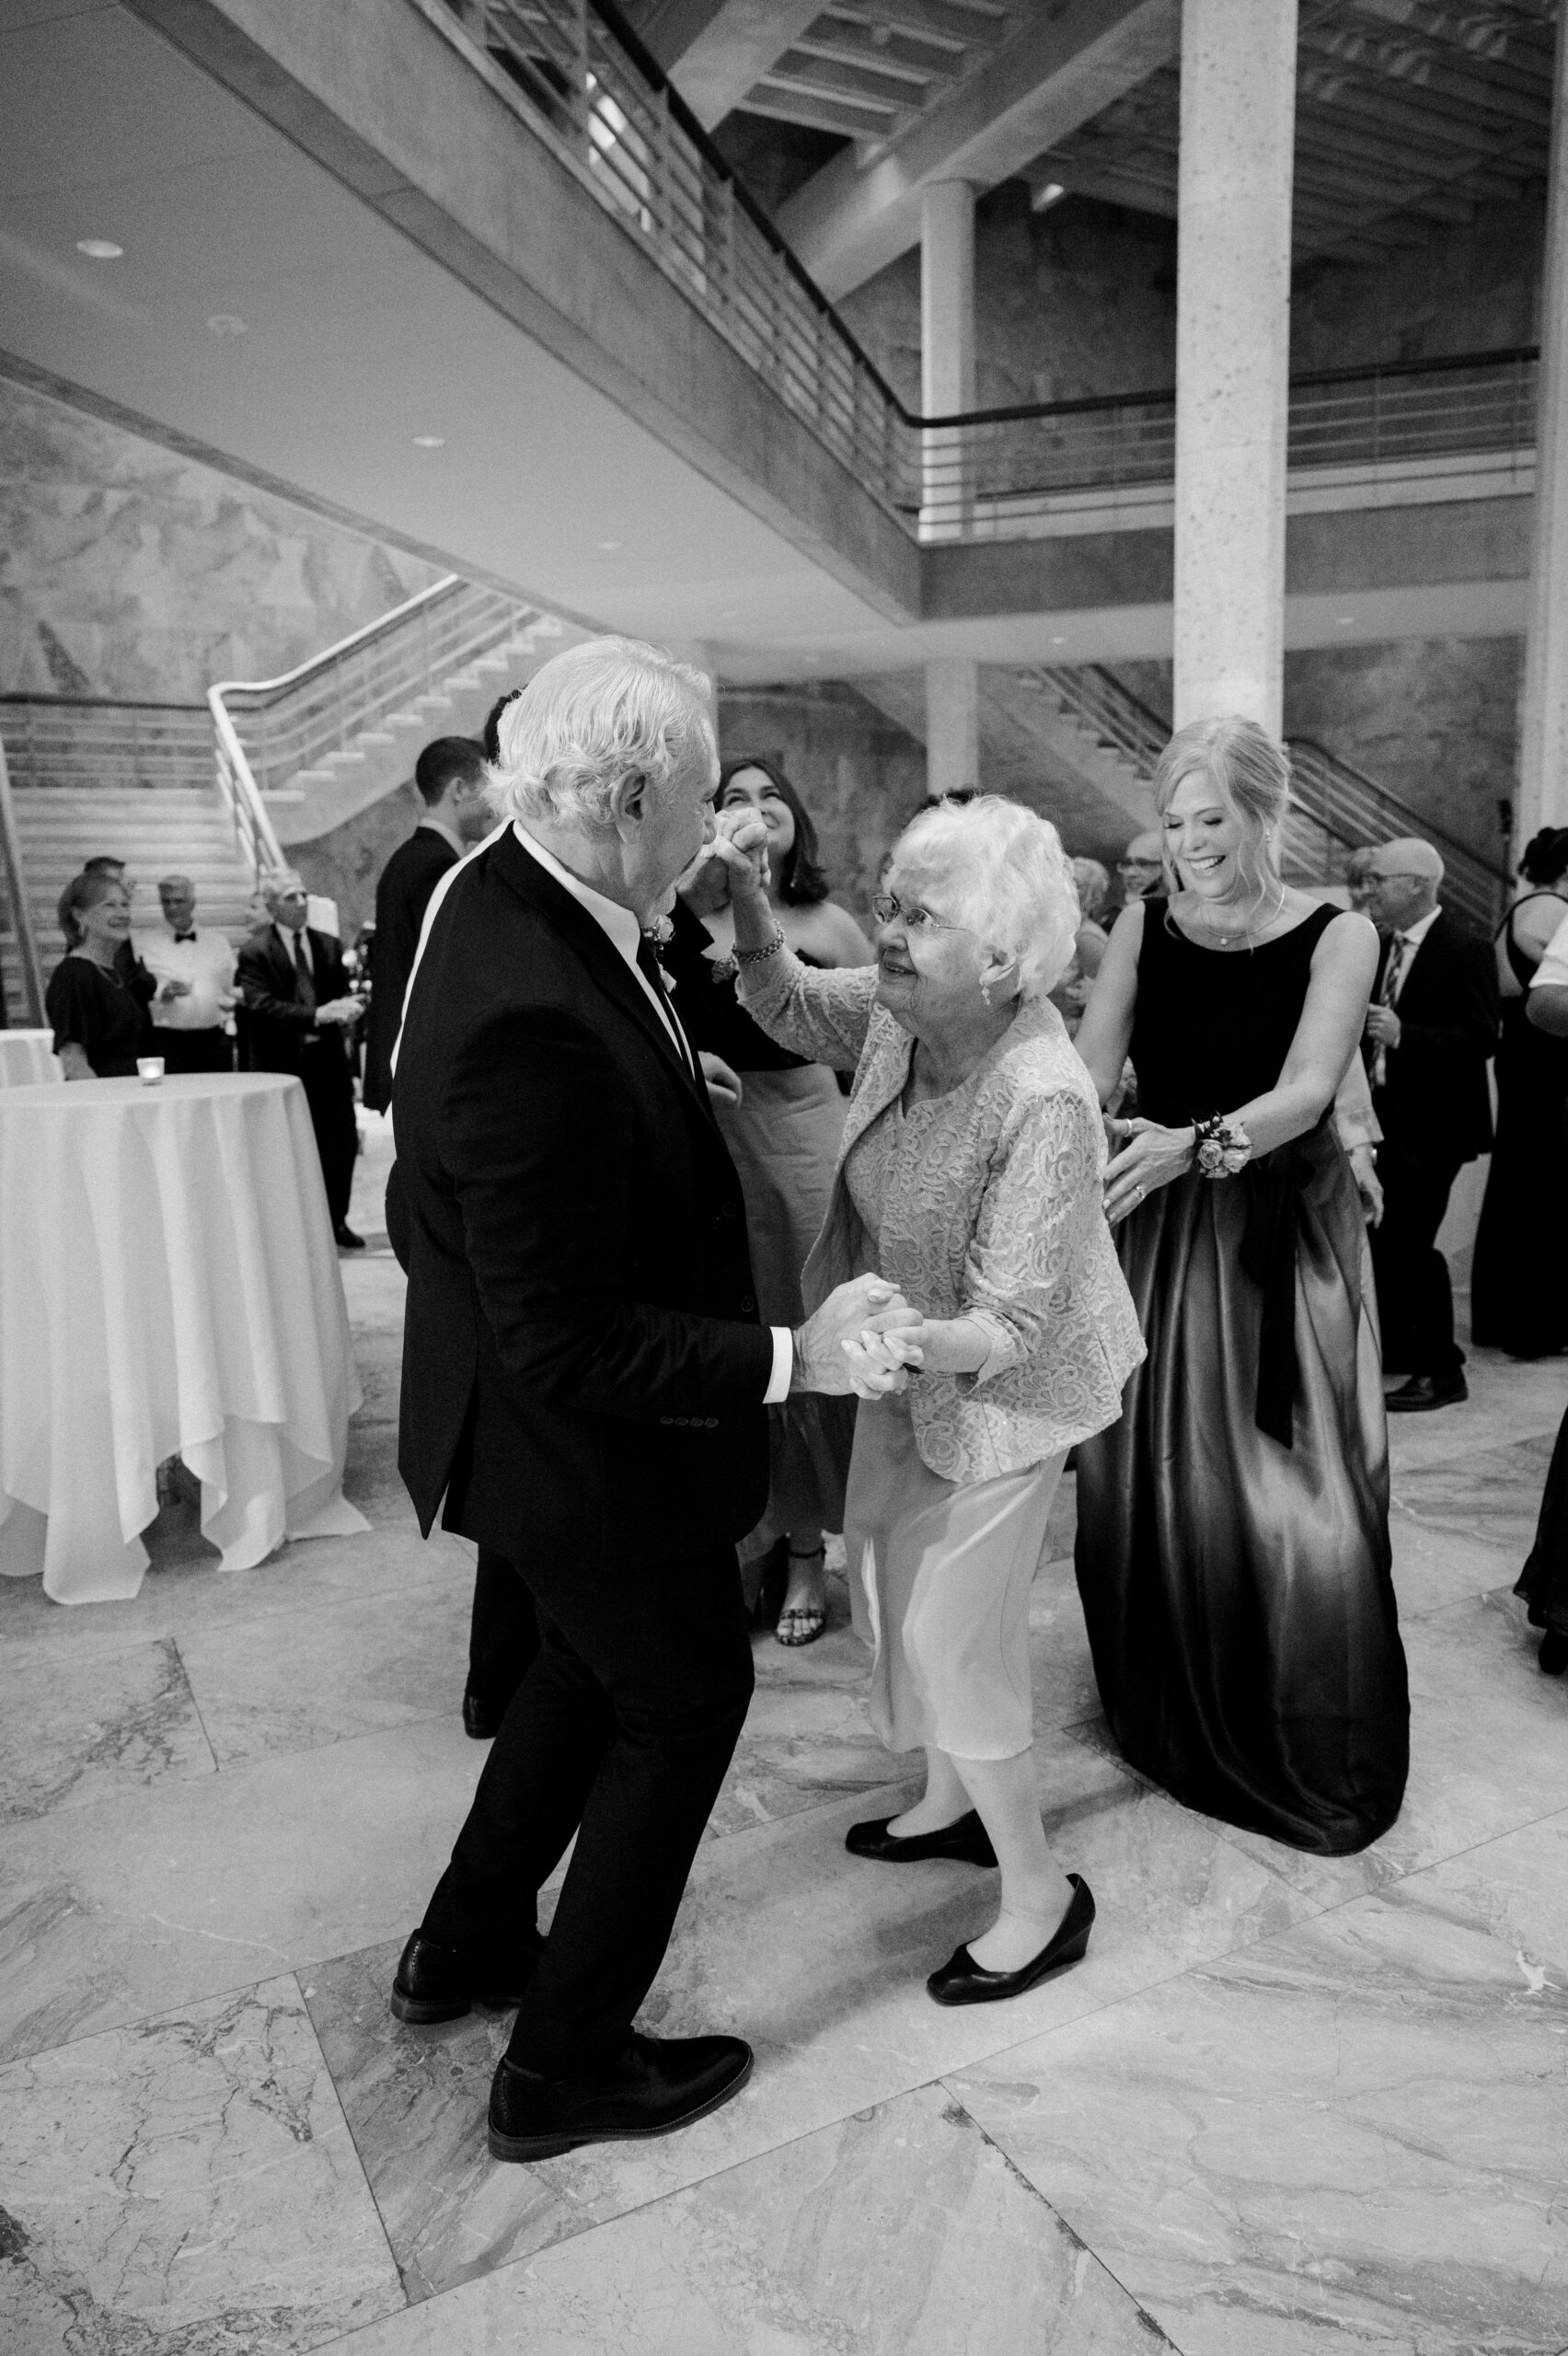 Black and white photo of older couple dancing, mother of bride stands behind the woman to gently support her while she dances